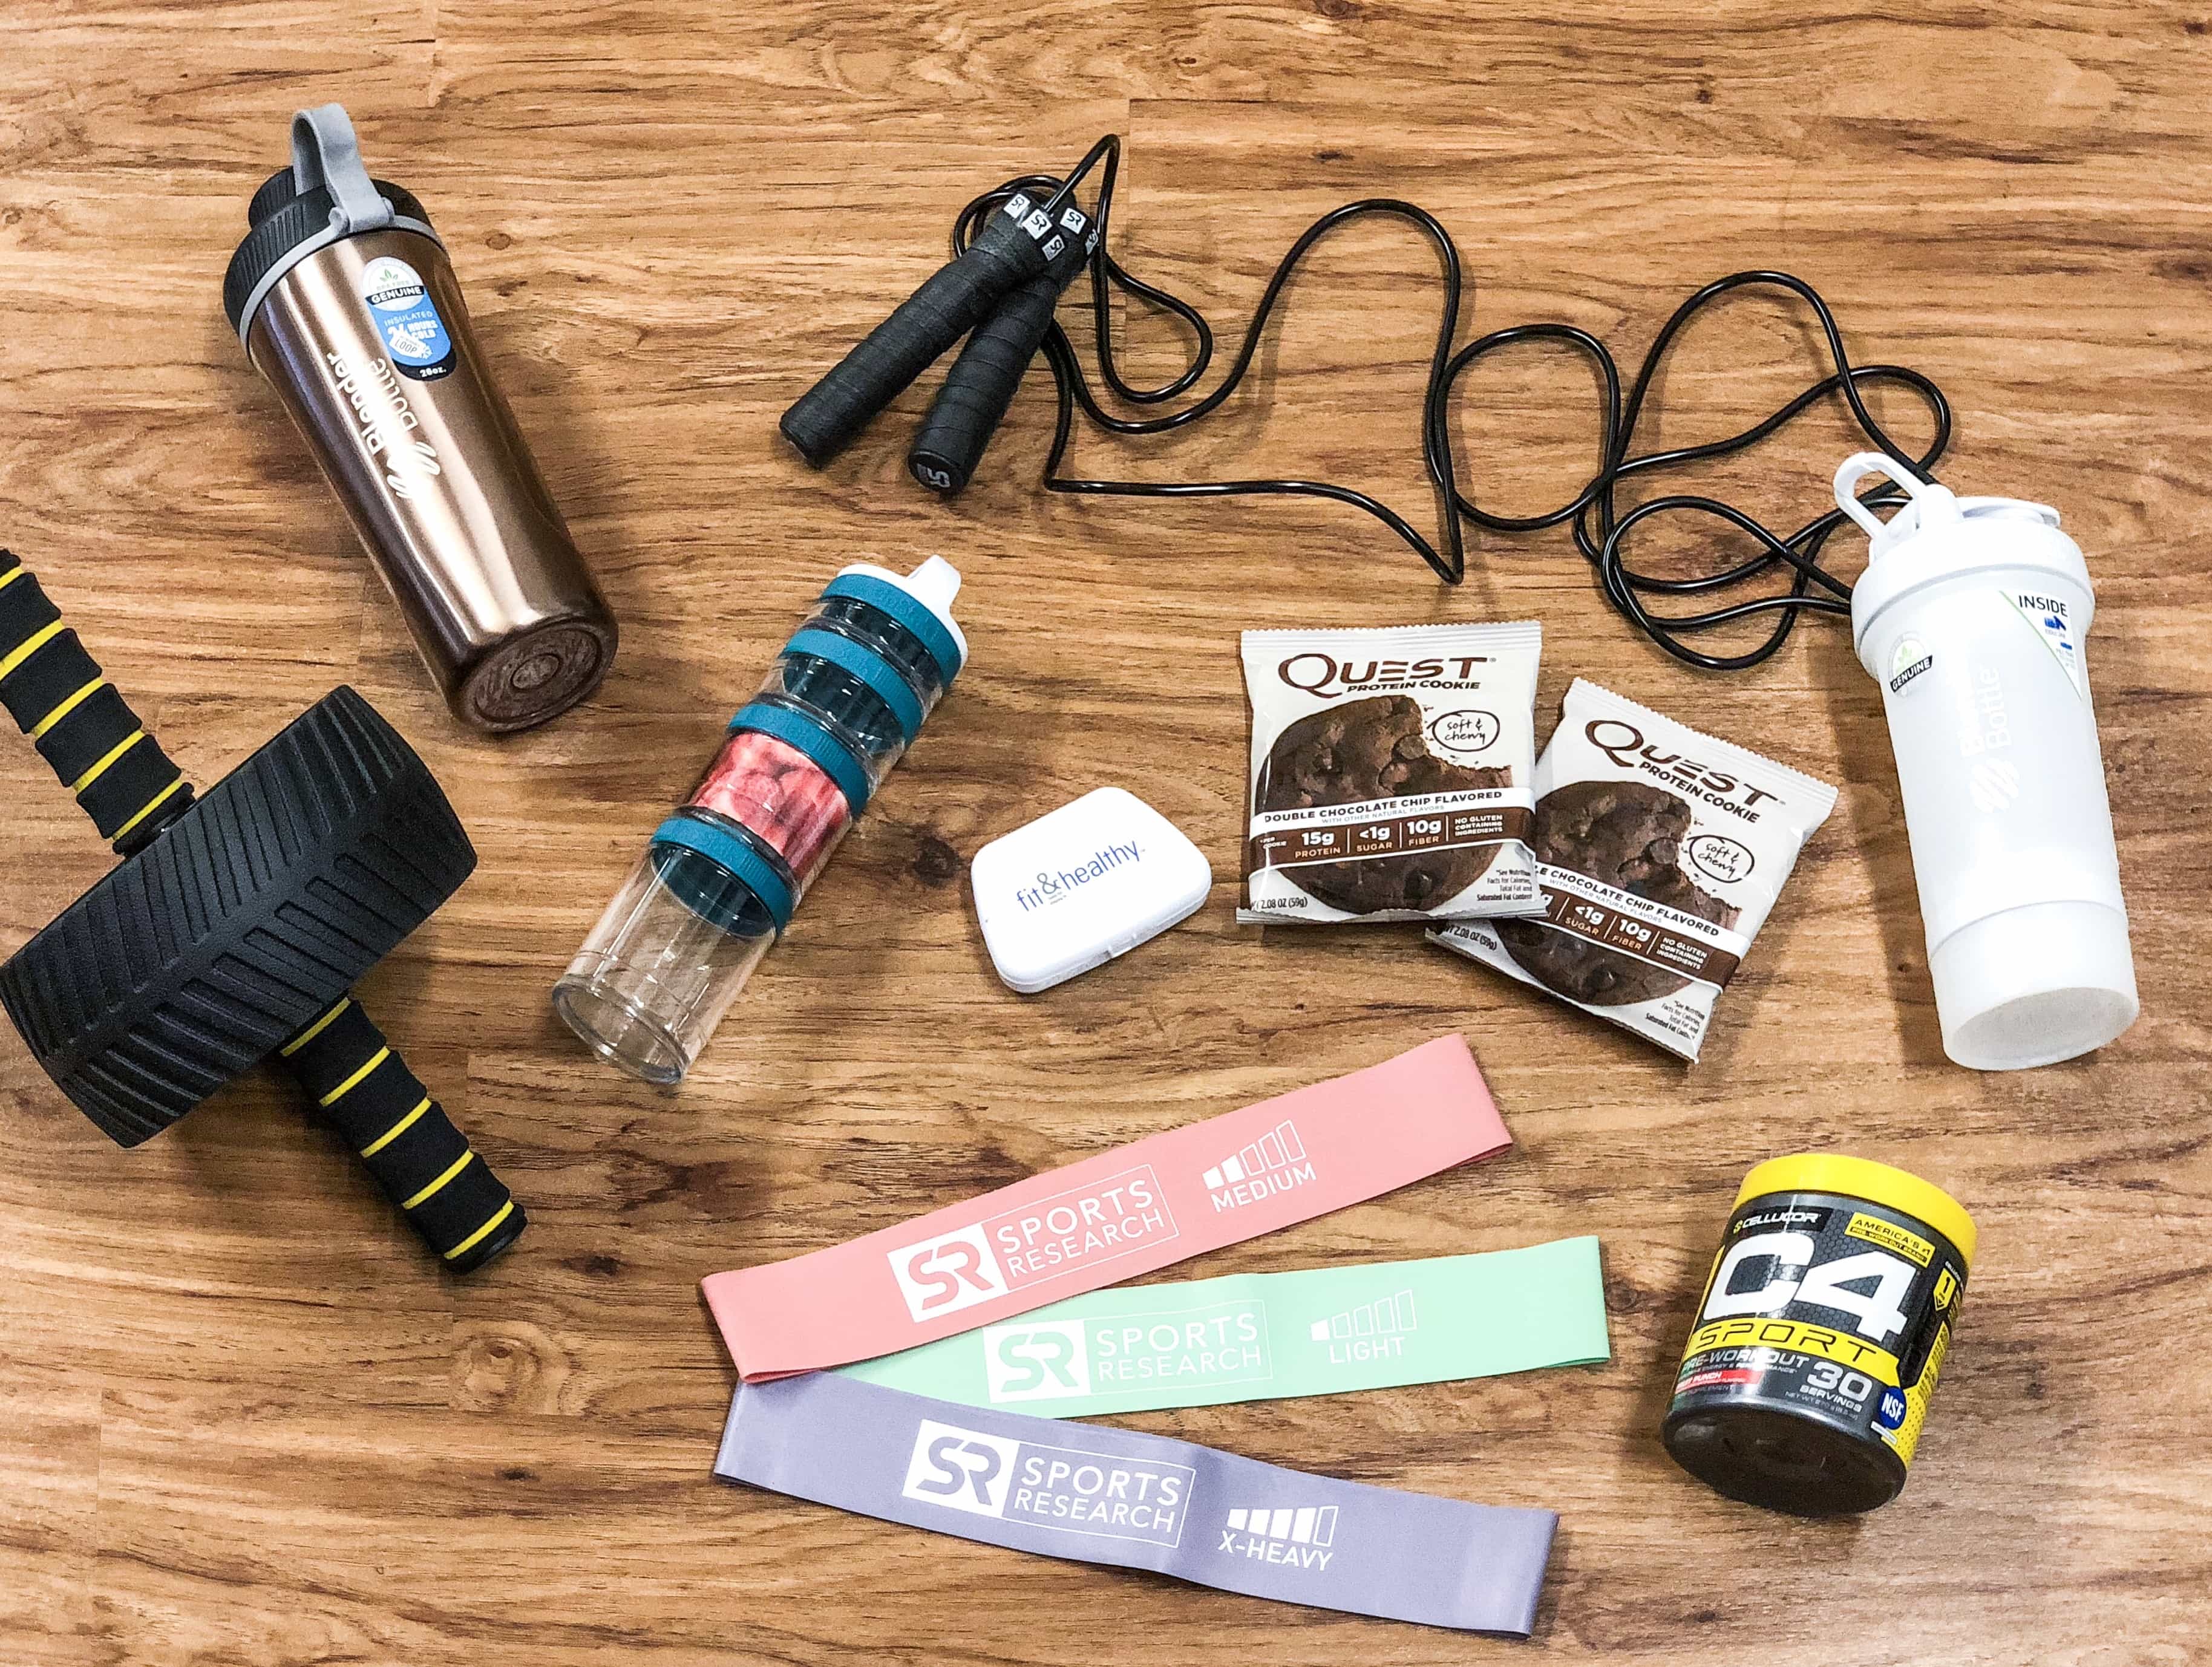 Top 9 Fitness Gifts Under $25 for the Fitness Lovers on Your List!